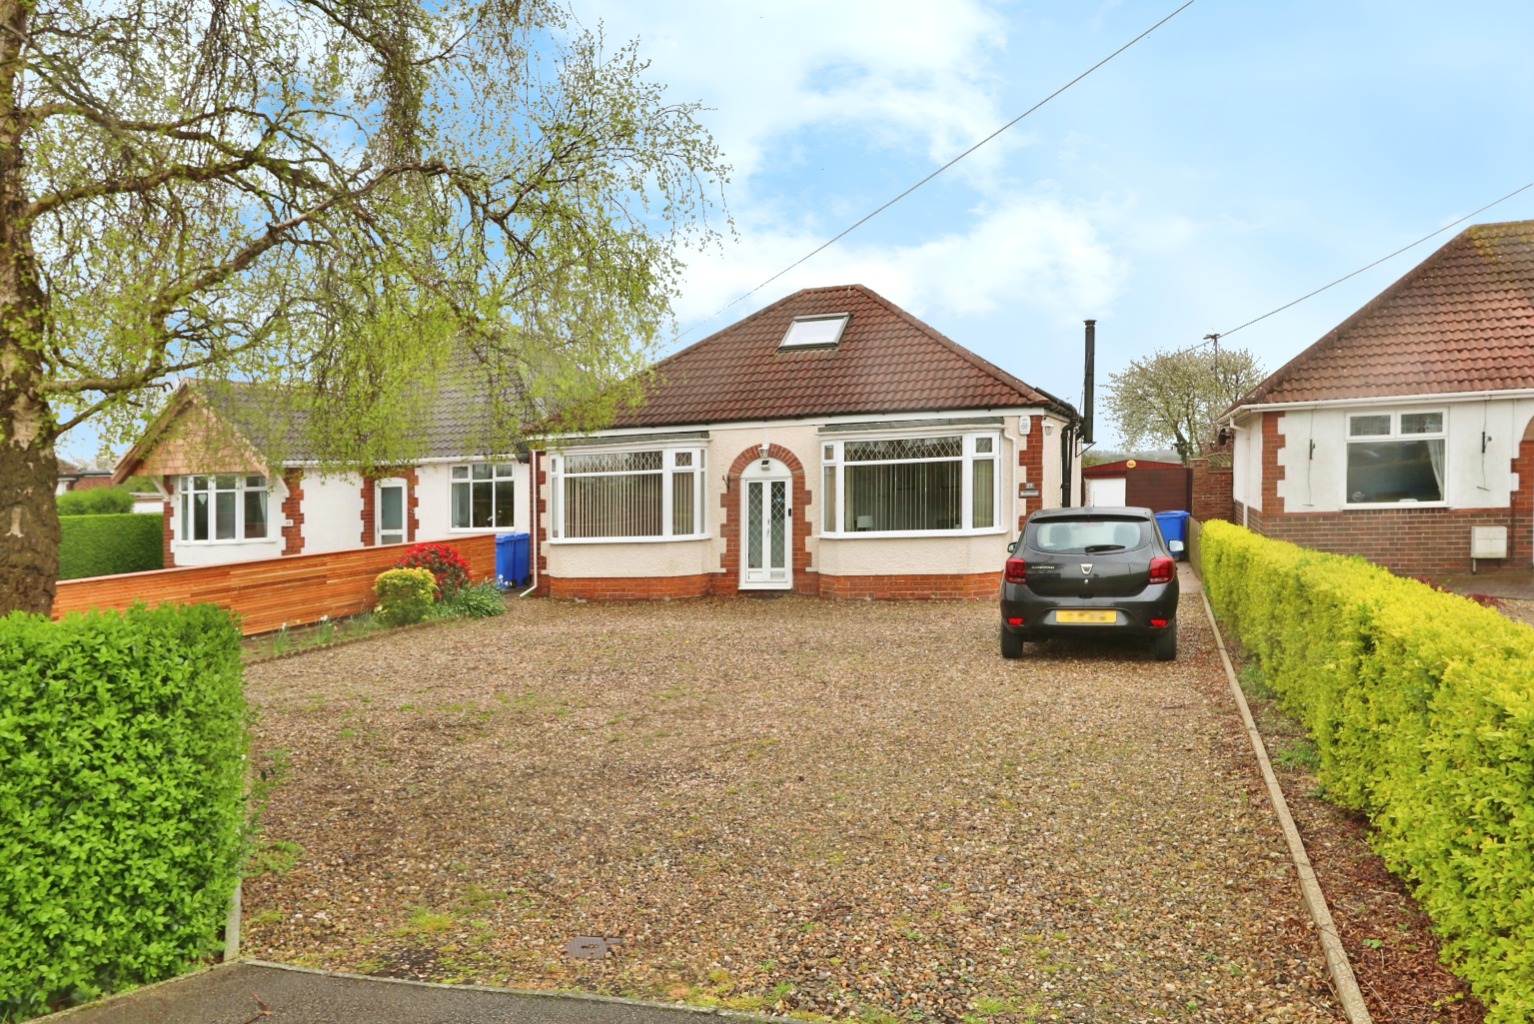 3 bed detached bungalow for sale in Bridge Bungalows, Hull - Property Image 1